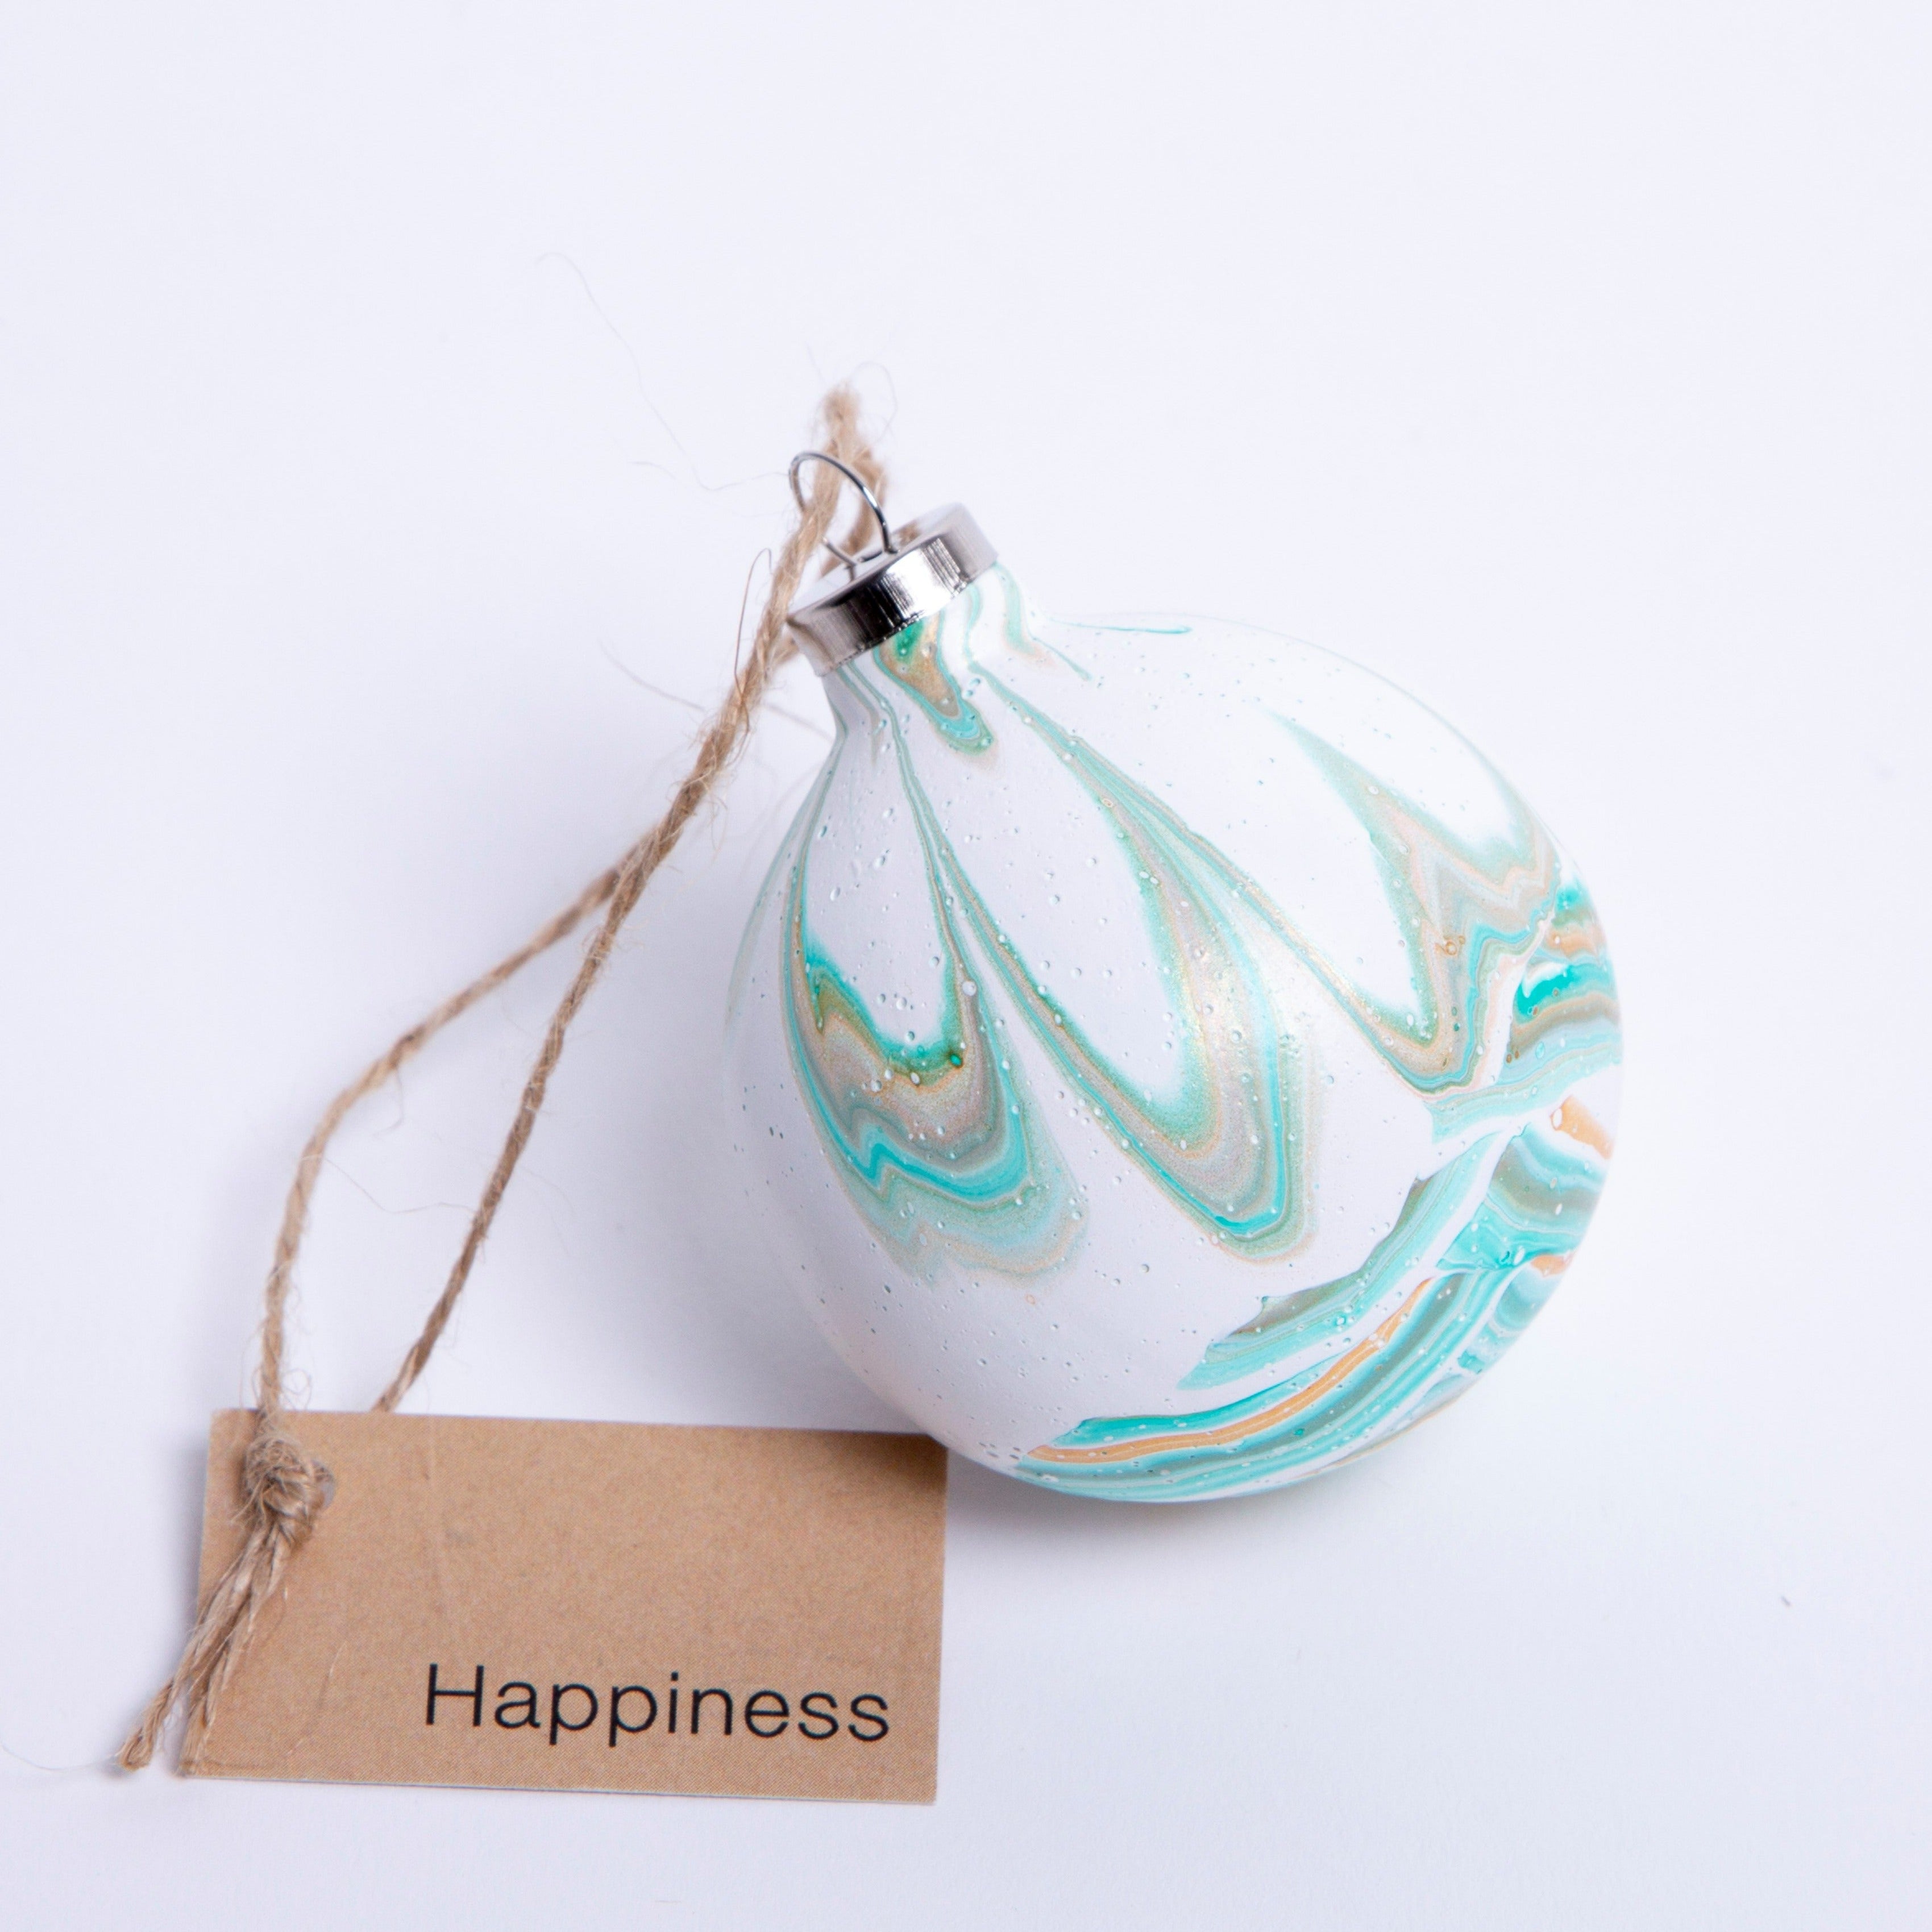 'Happiness' White & Green Hand Painted Ceramic Bauble - Round Shape